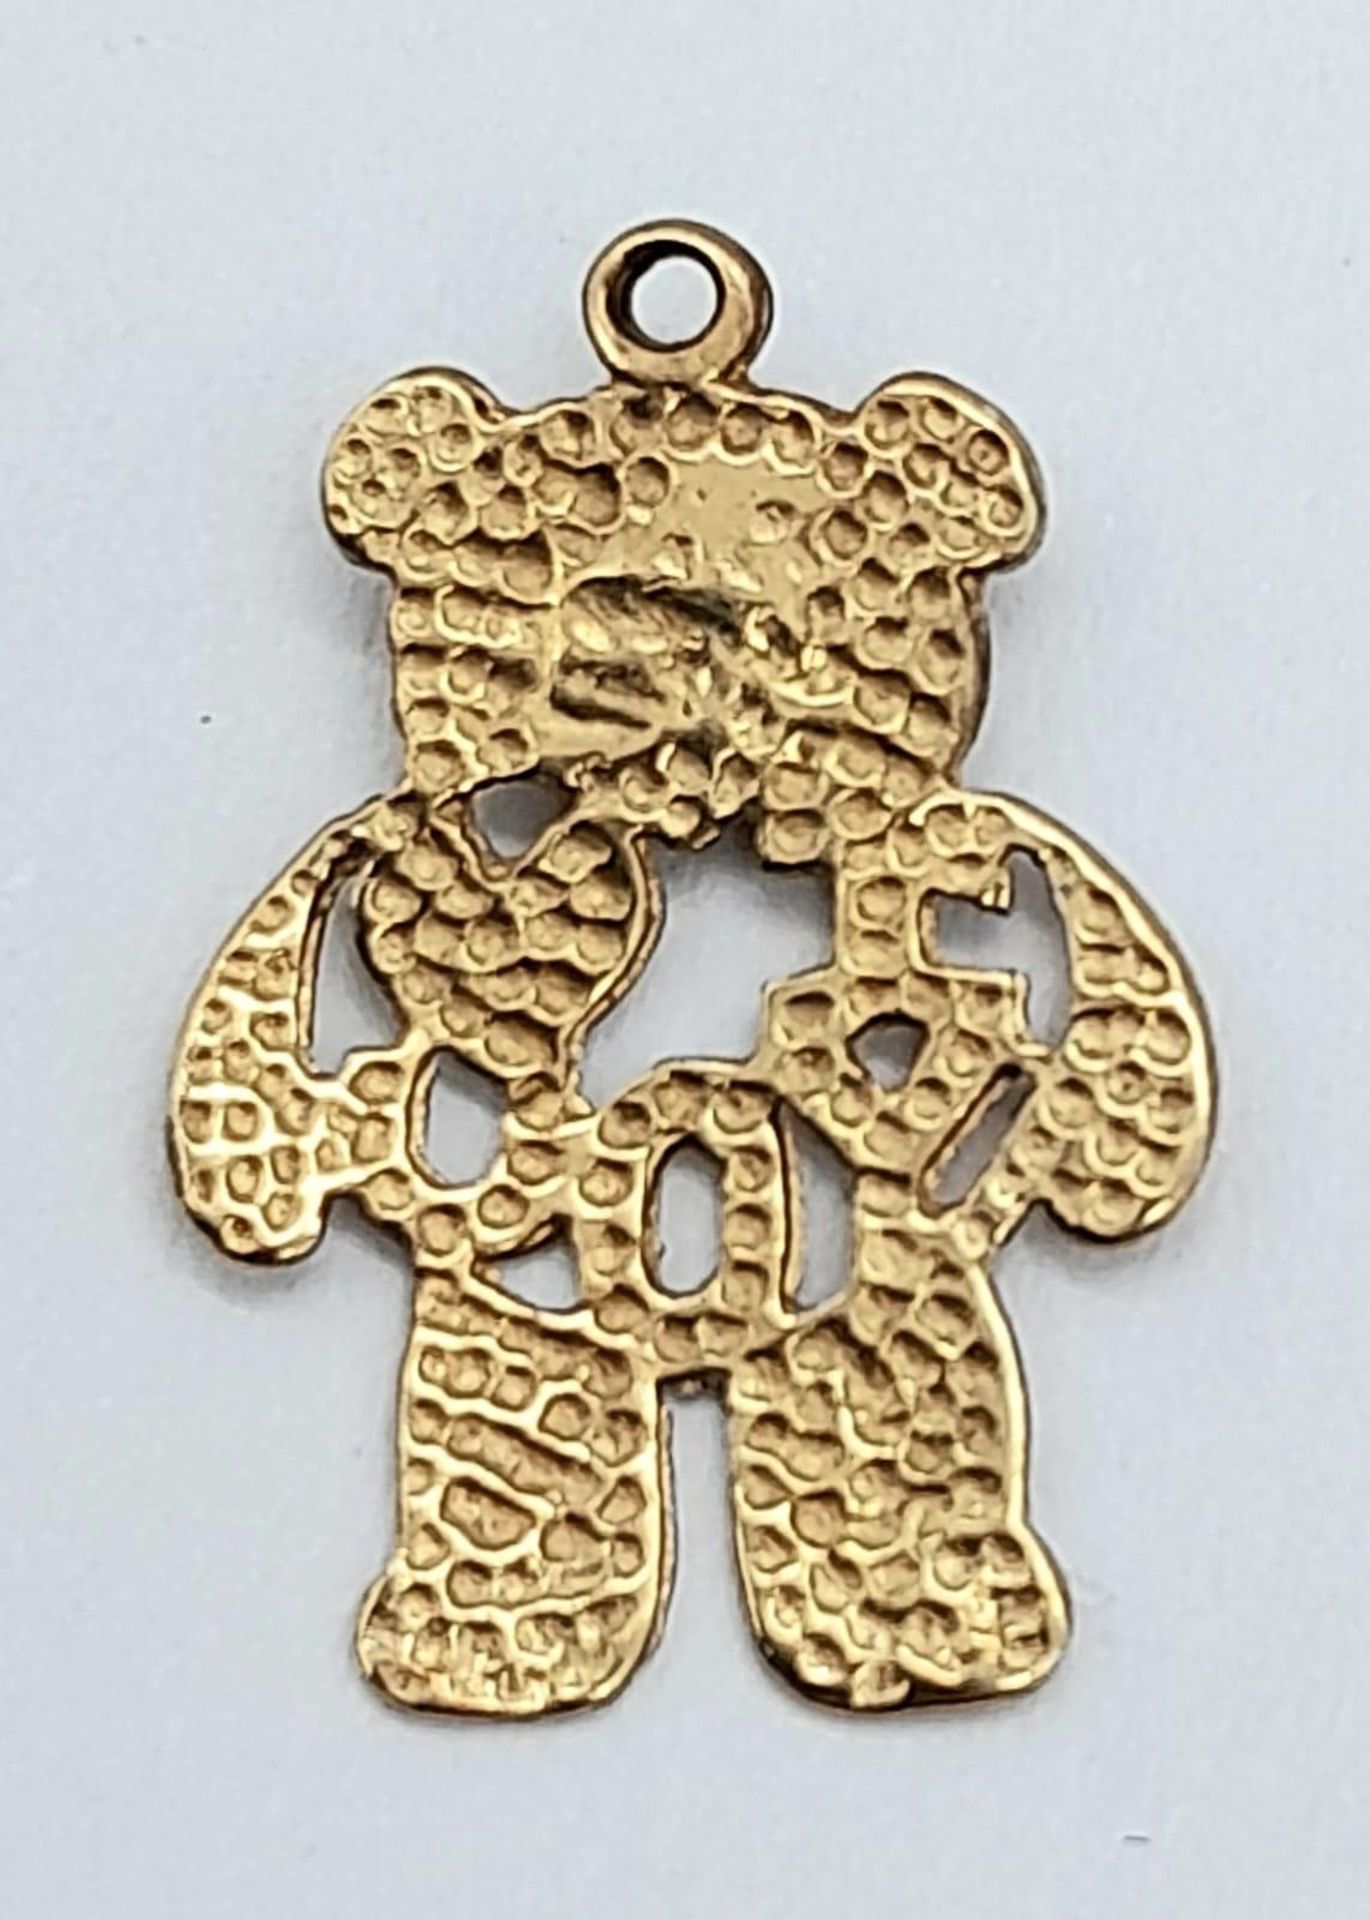 A 9K YELLOW GOLD 'I LOVE YOU' TEDDY BEAR CHARM / PENDANT. 0.5G - Image 2 of 3